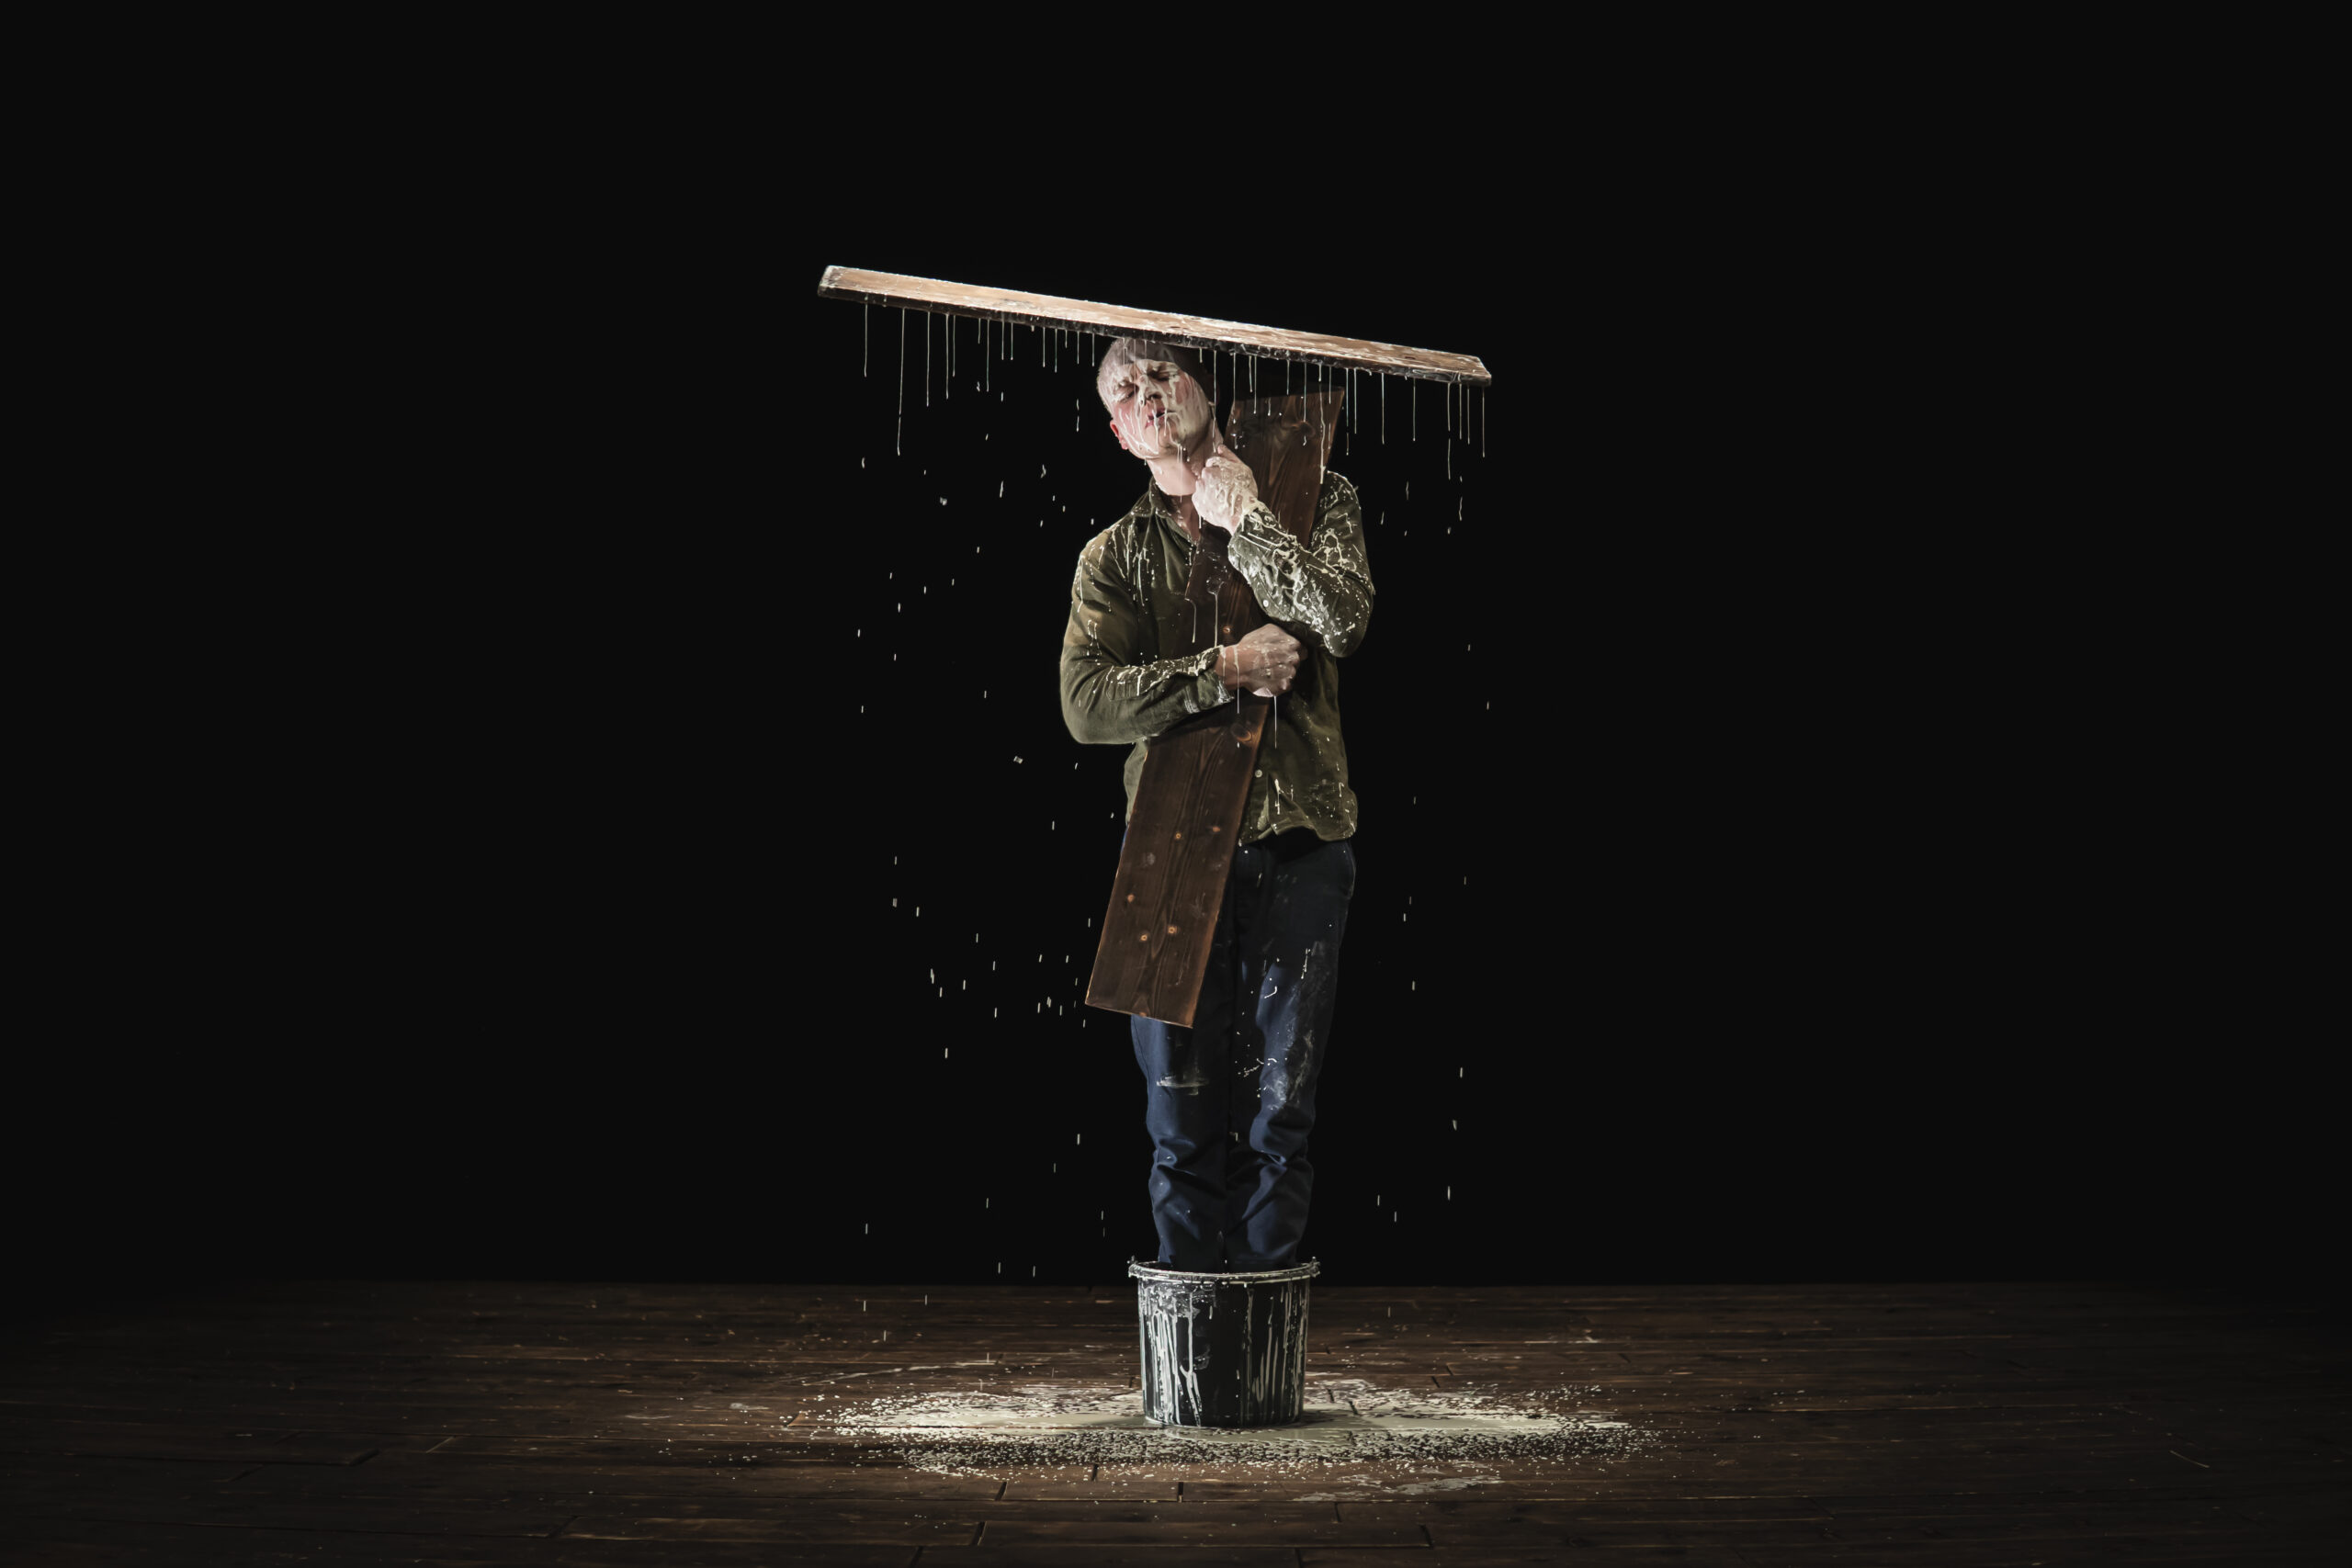 This is a photo of a spot-lit man standing in a black bucket holding up a plank of wood over his head which is covered in glue> The glue is dripping all over his head, face, clothes and the floor, creating a white pool on the stage around him.